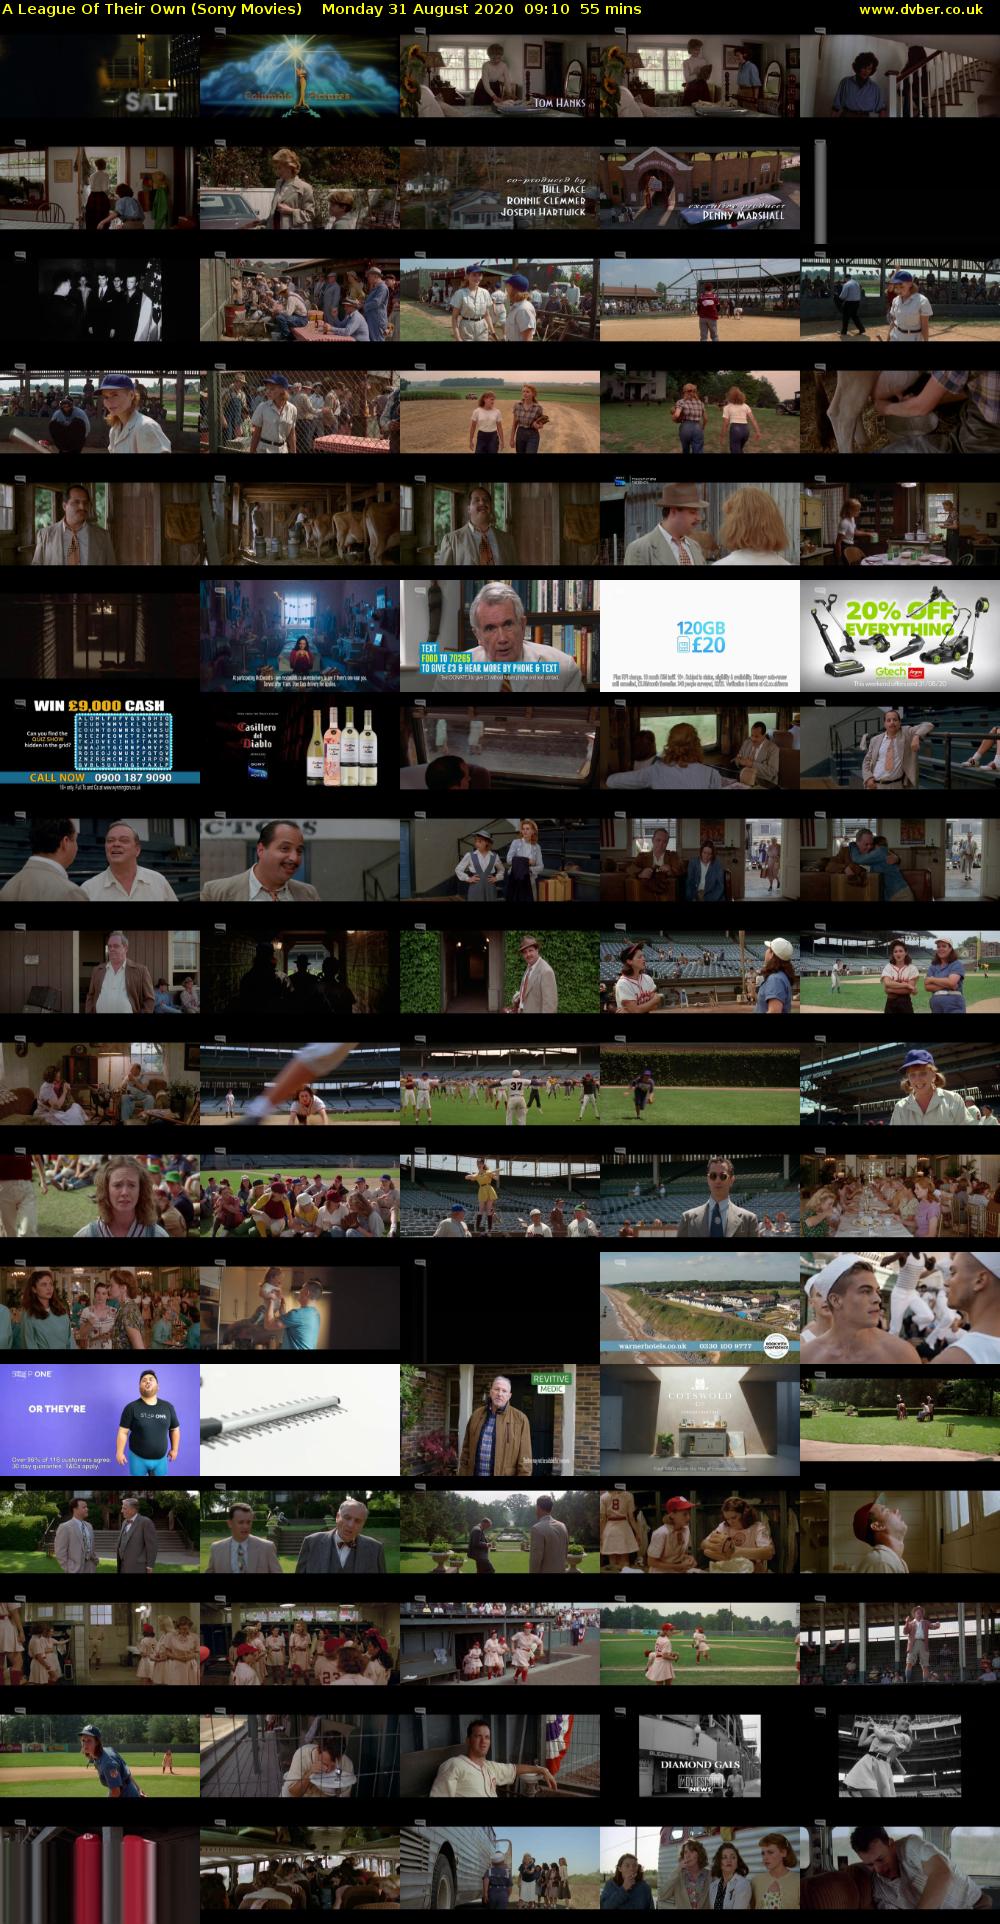 A League Of Their Own (Sony Movies) Monday 31 August 2020 09:10 - 10:05